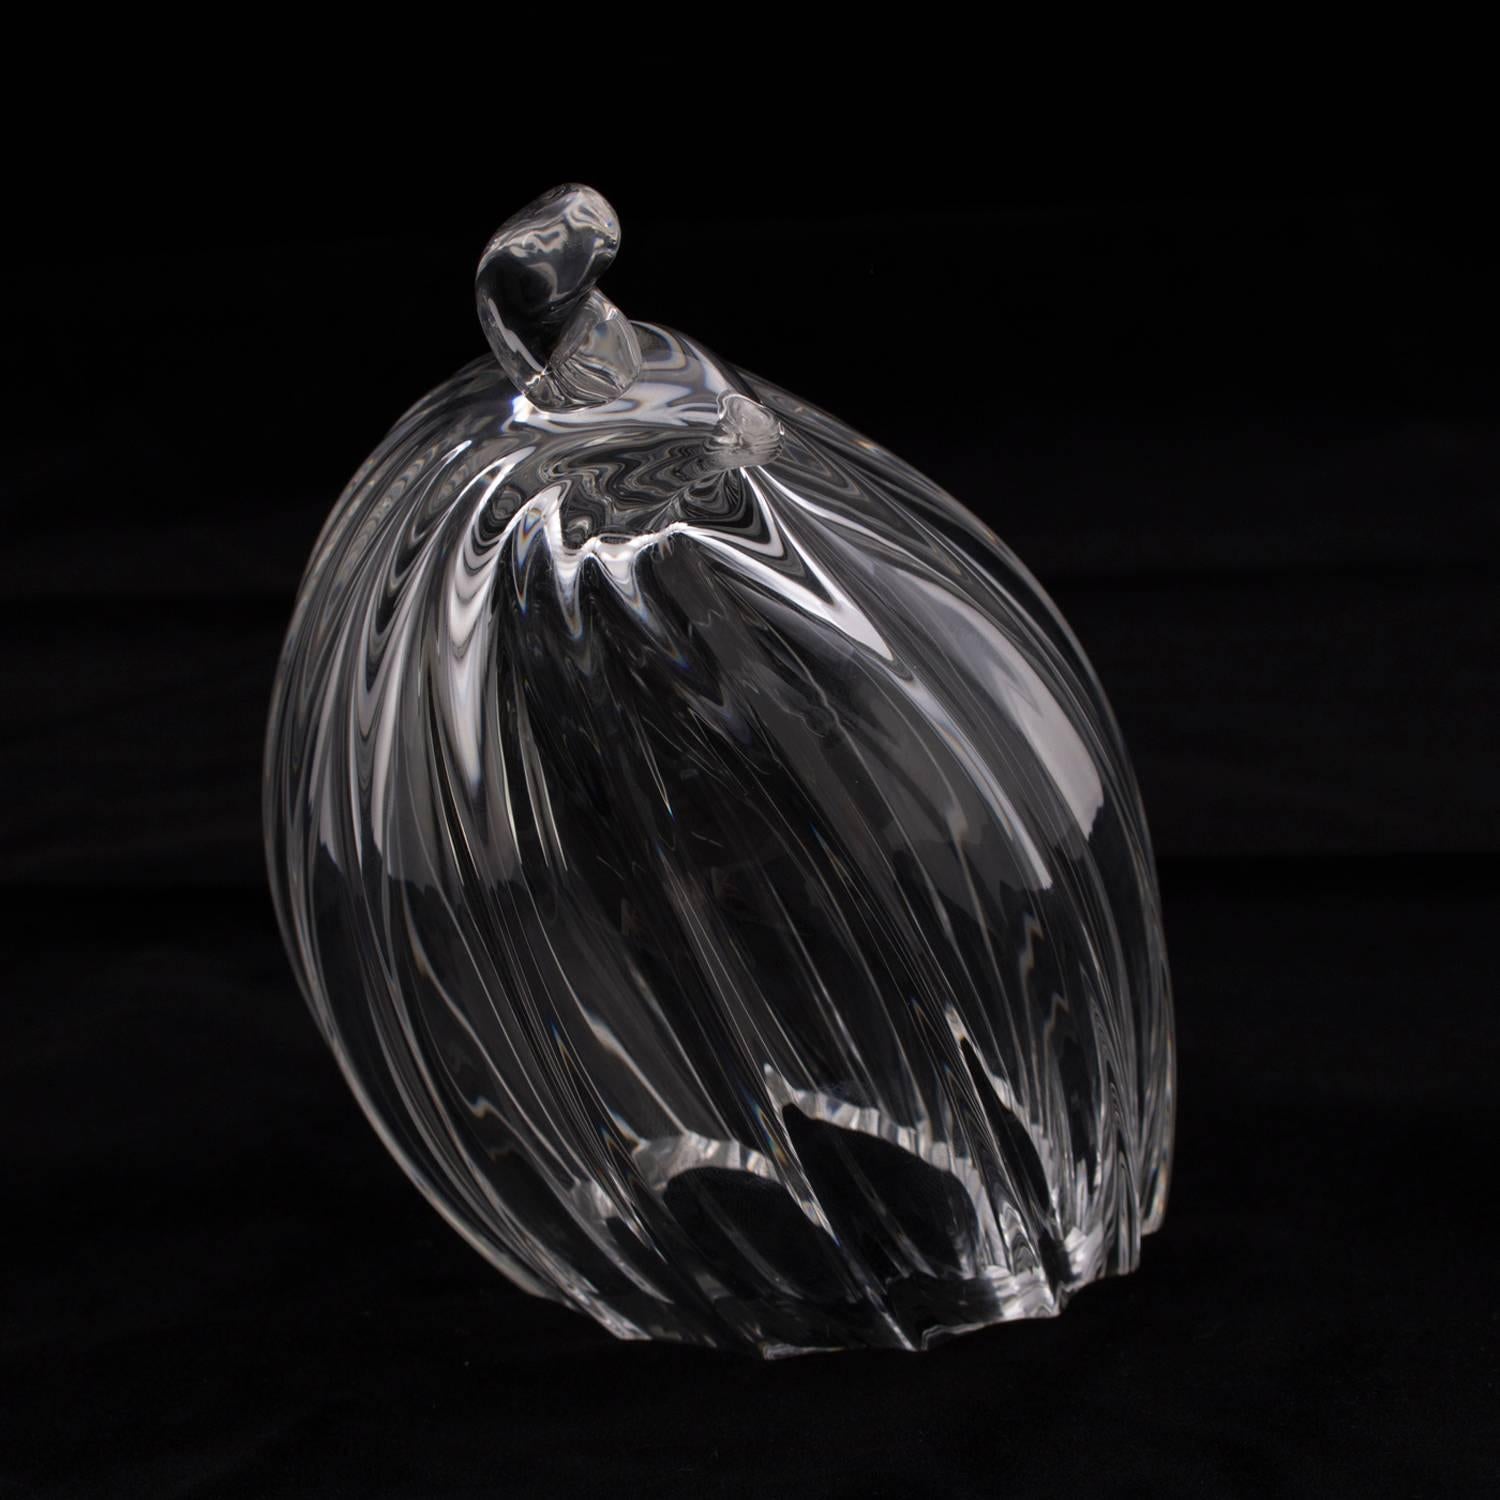 Art glass crystal figural sculpture paperweight of stylized quail by Steuben and designed by Donald Pollard, hollow and signed on base, 20th century

Measures: 5.5